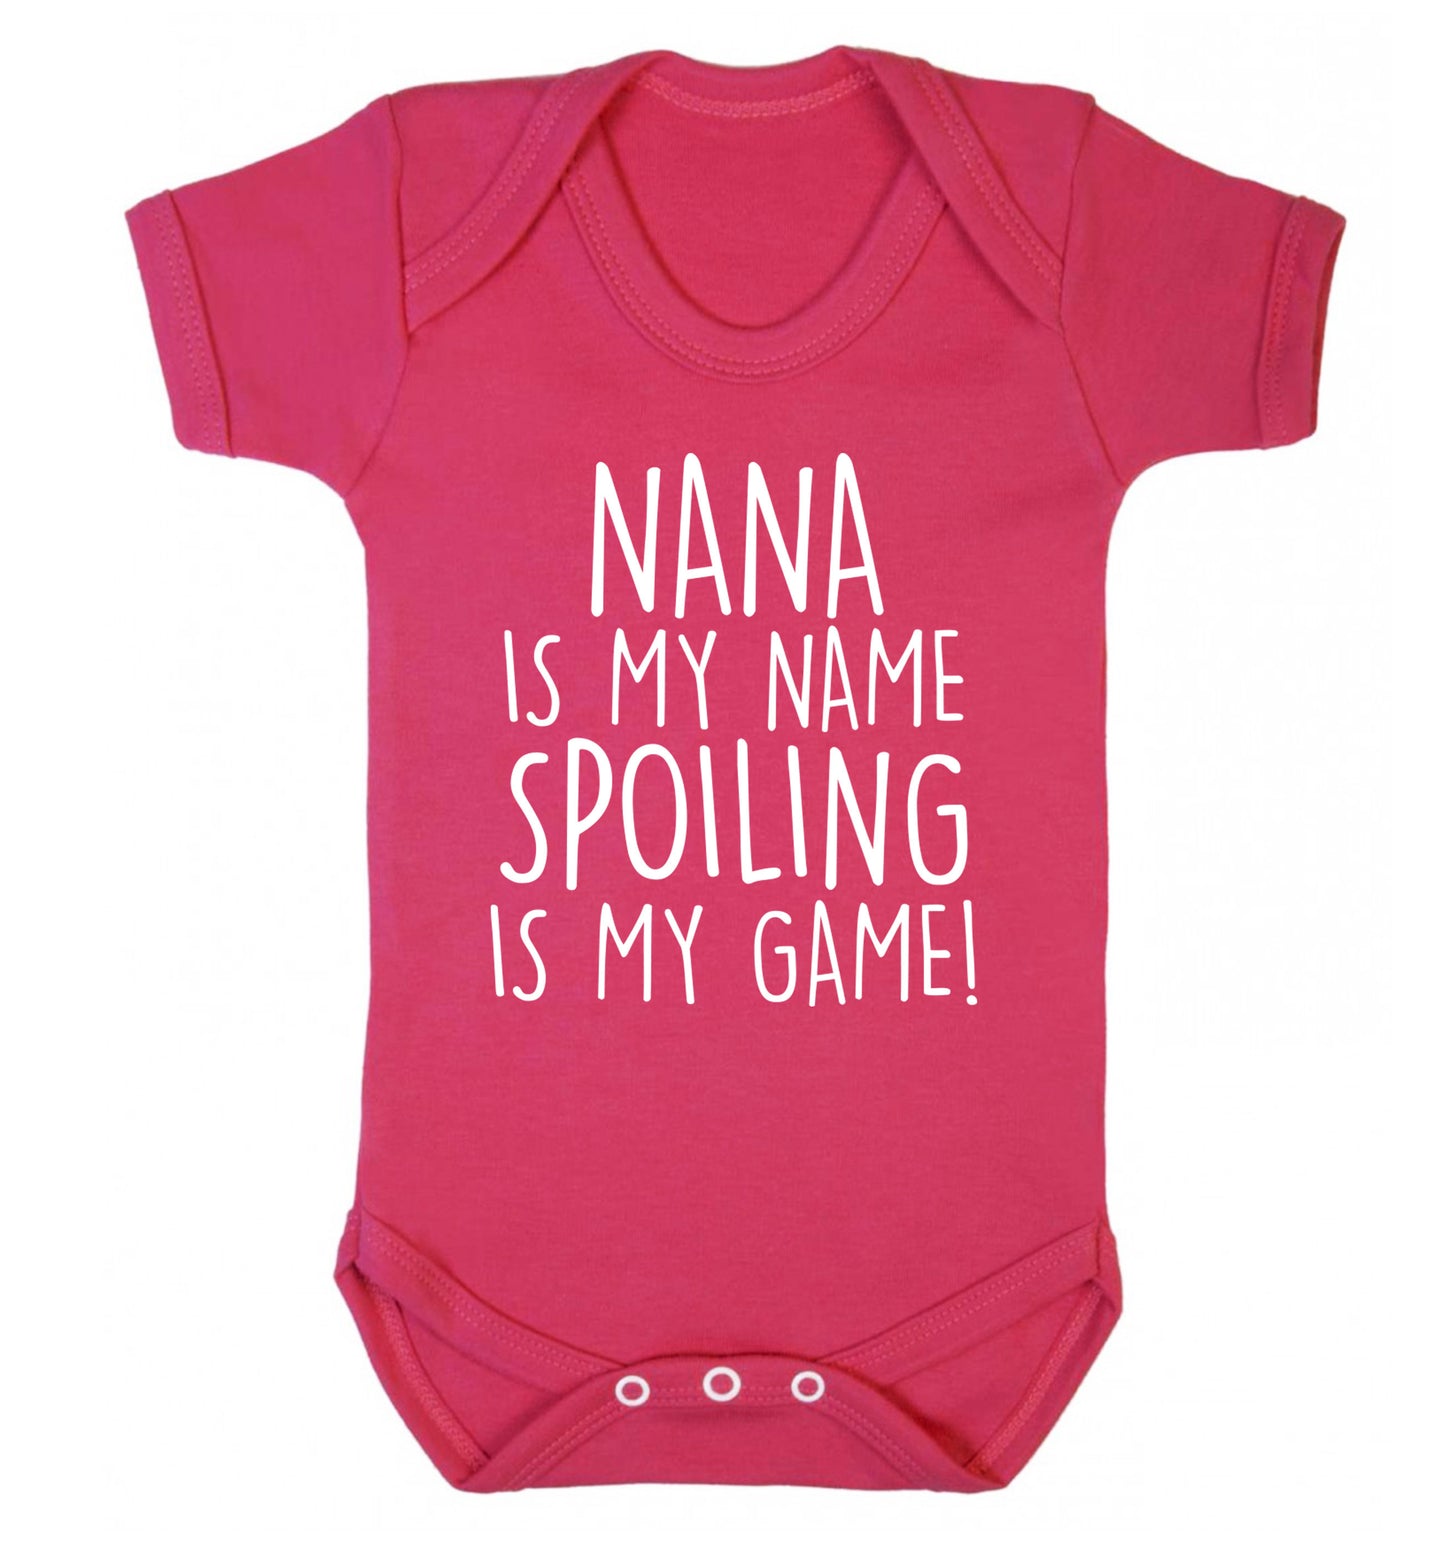 Nana is my name, spoiling is my game Baby Vest dark pink 18-24 months